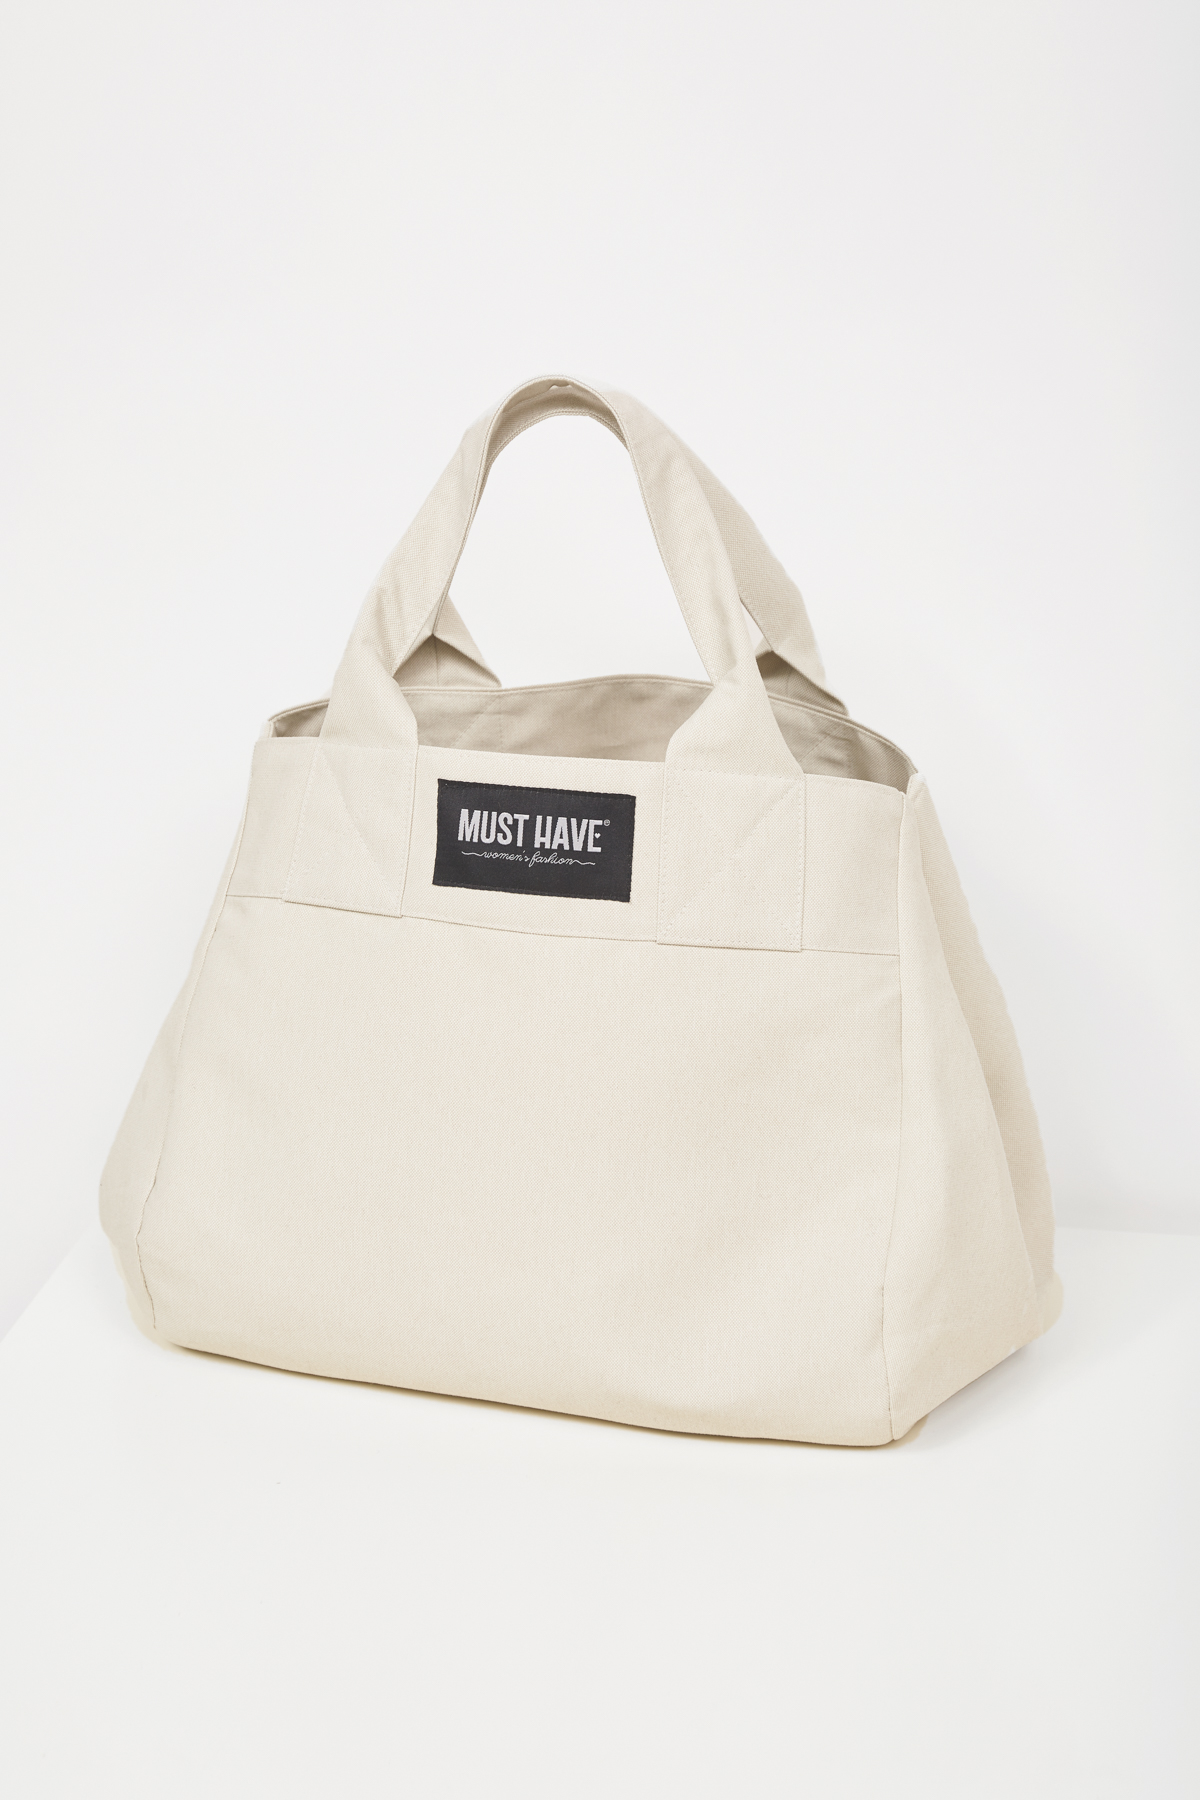 MustHave cotton bag, photo 1